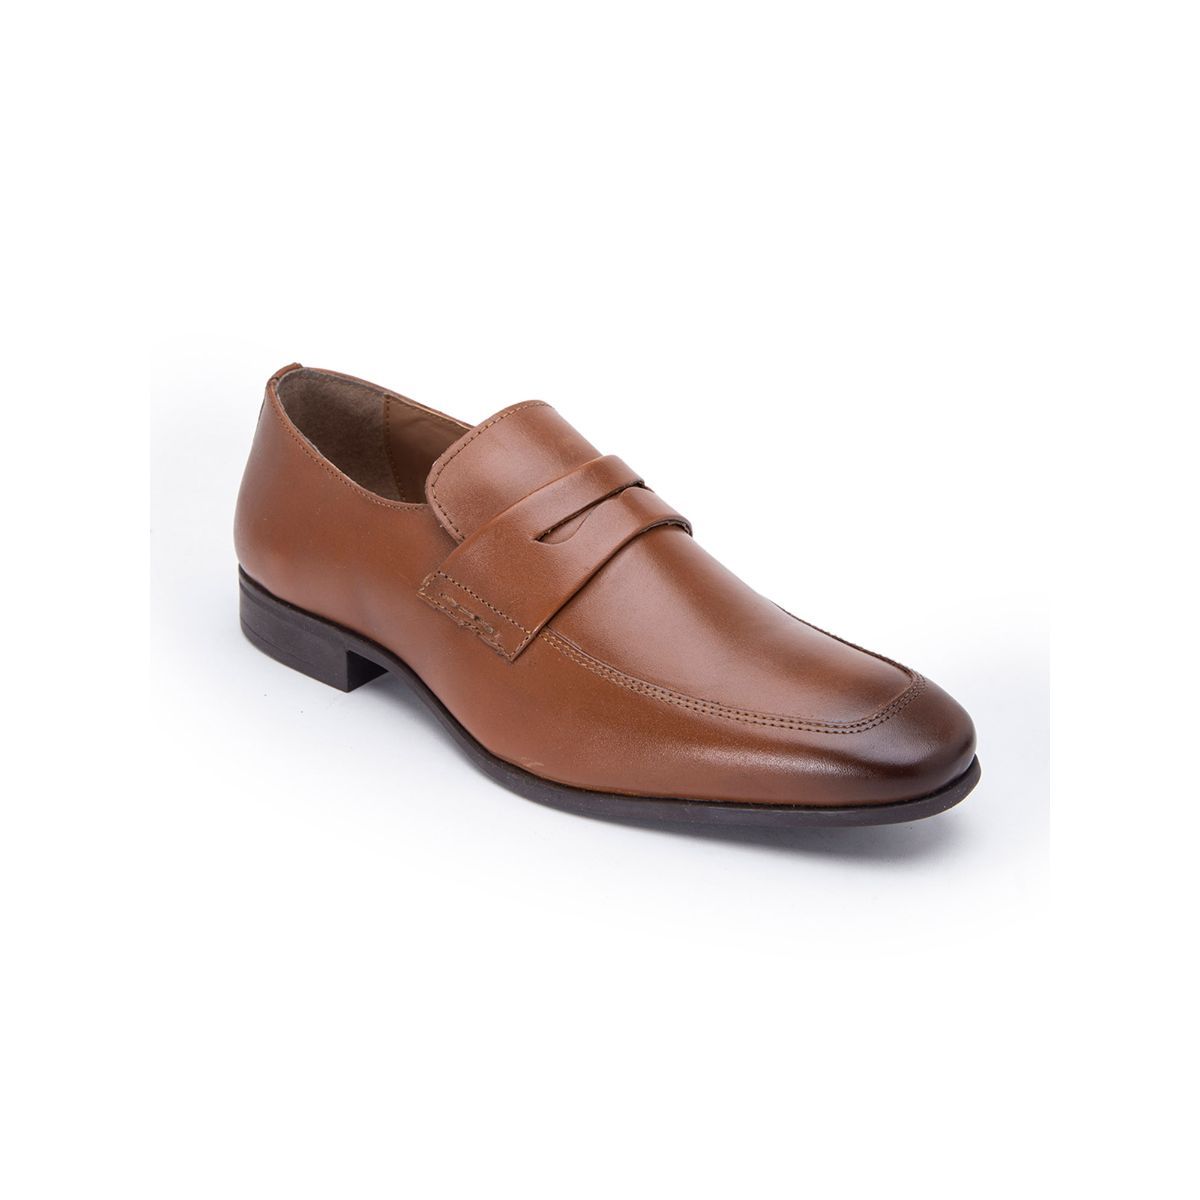 Allen Cooper Tan Leather Formal Shoes - 9